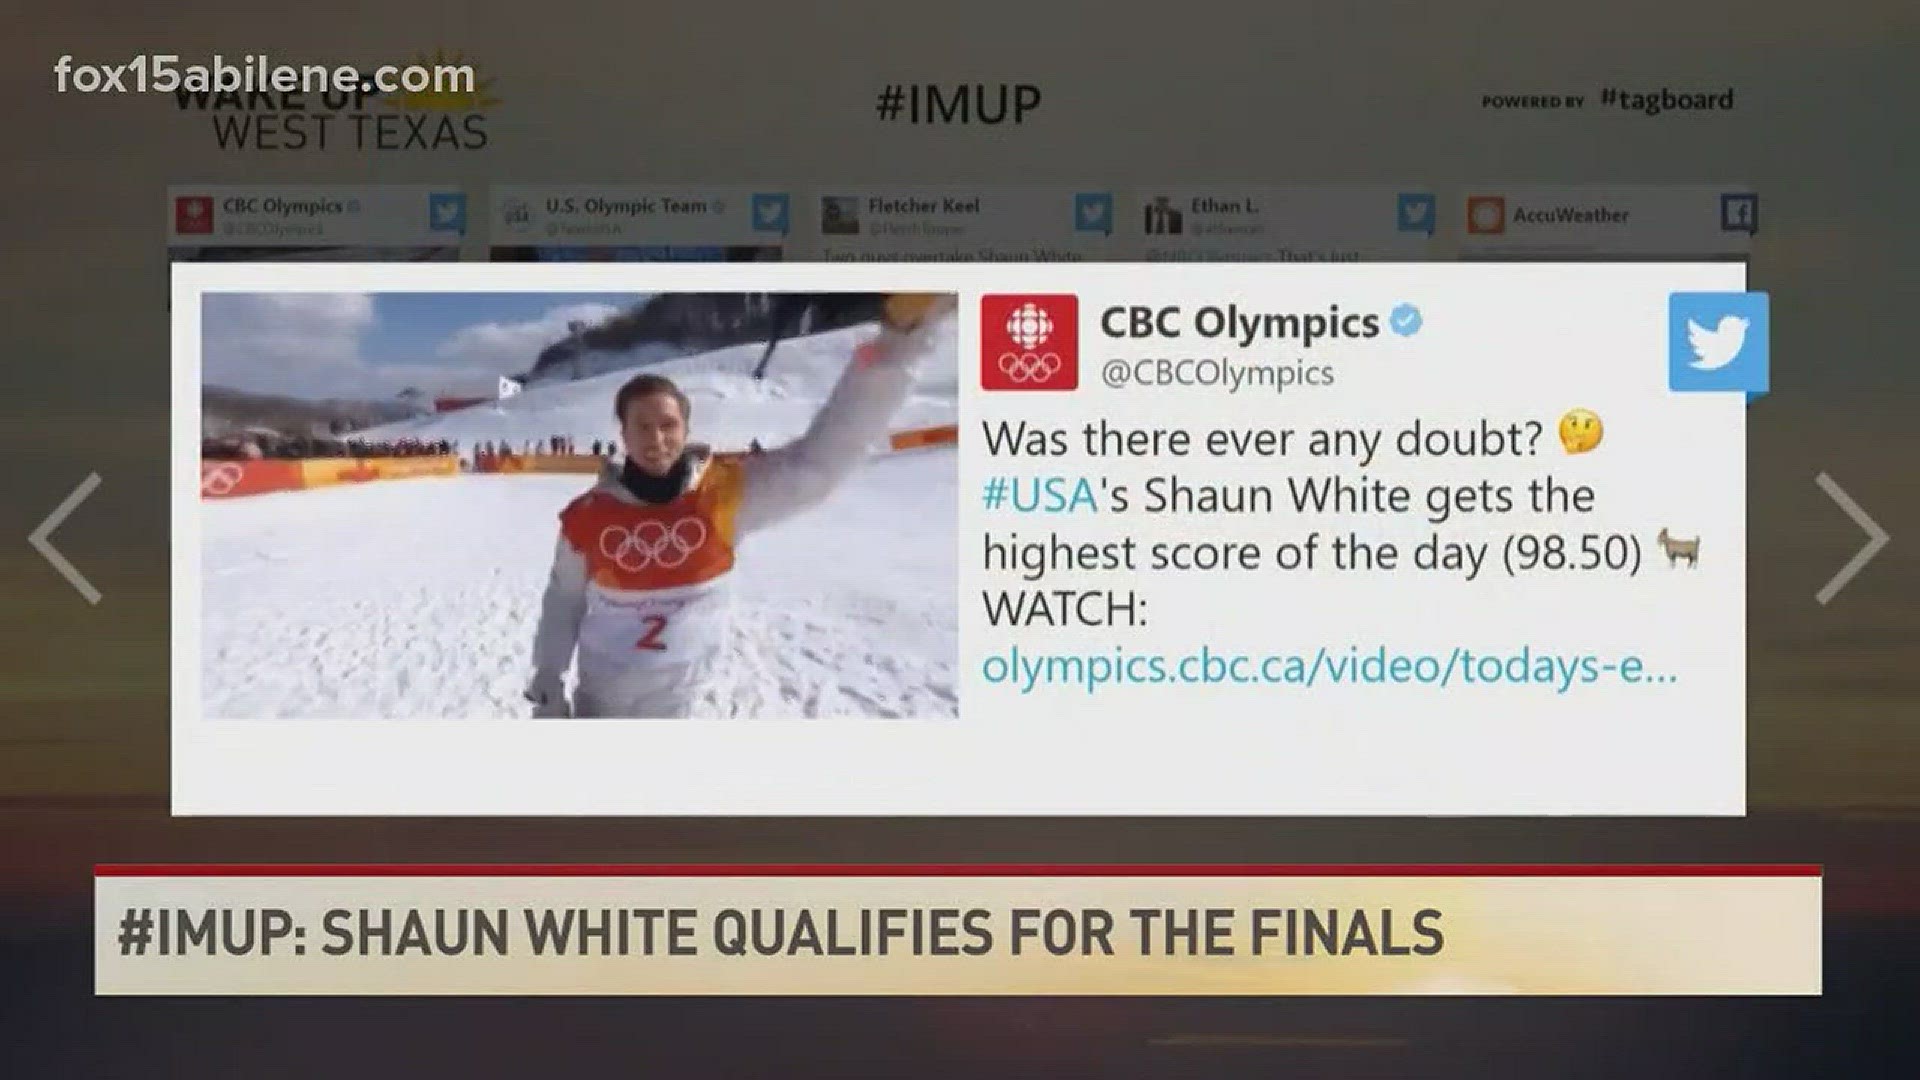 Shaun White receives a 98.5 which qualifies him for the finals of the Winter Olympics